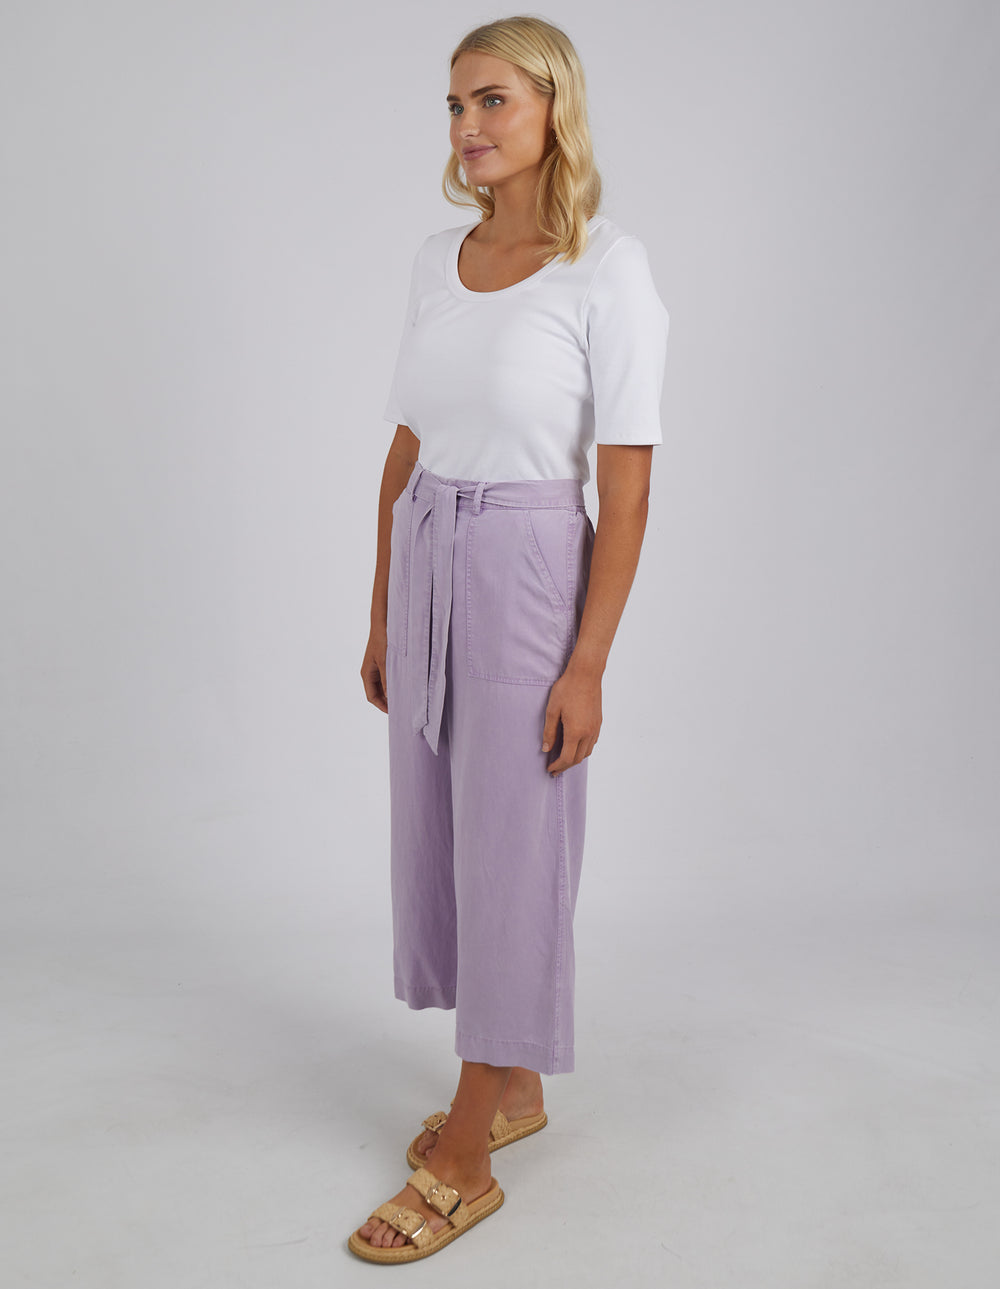 Elm - Bliss Washed Pant - Periwinkle